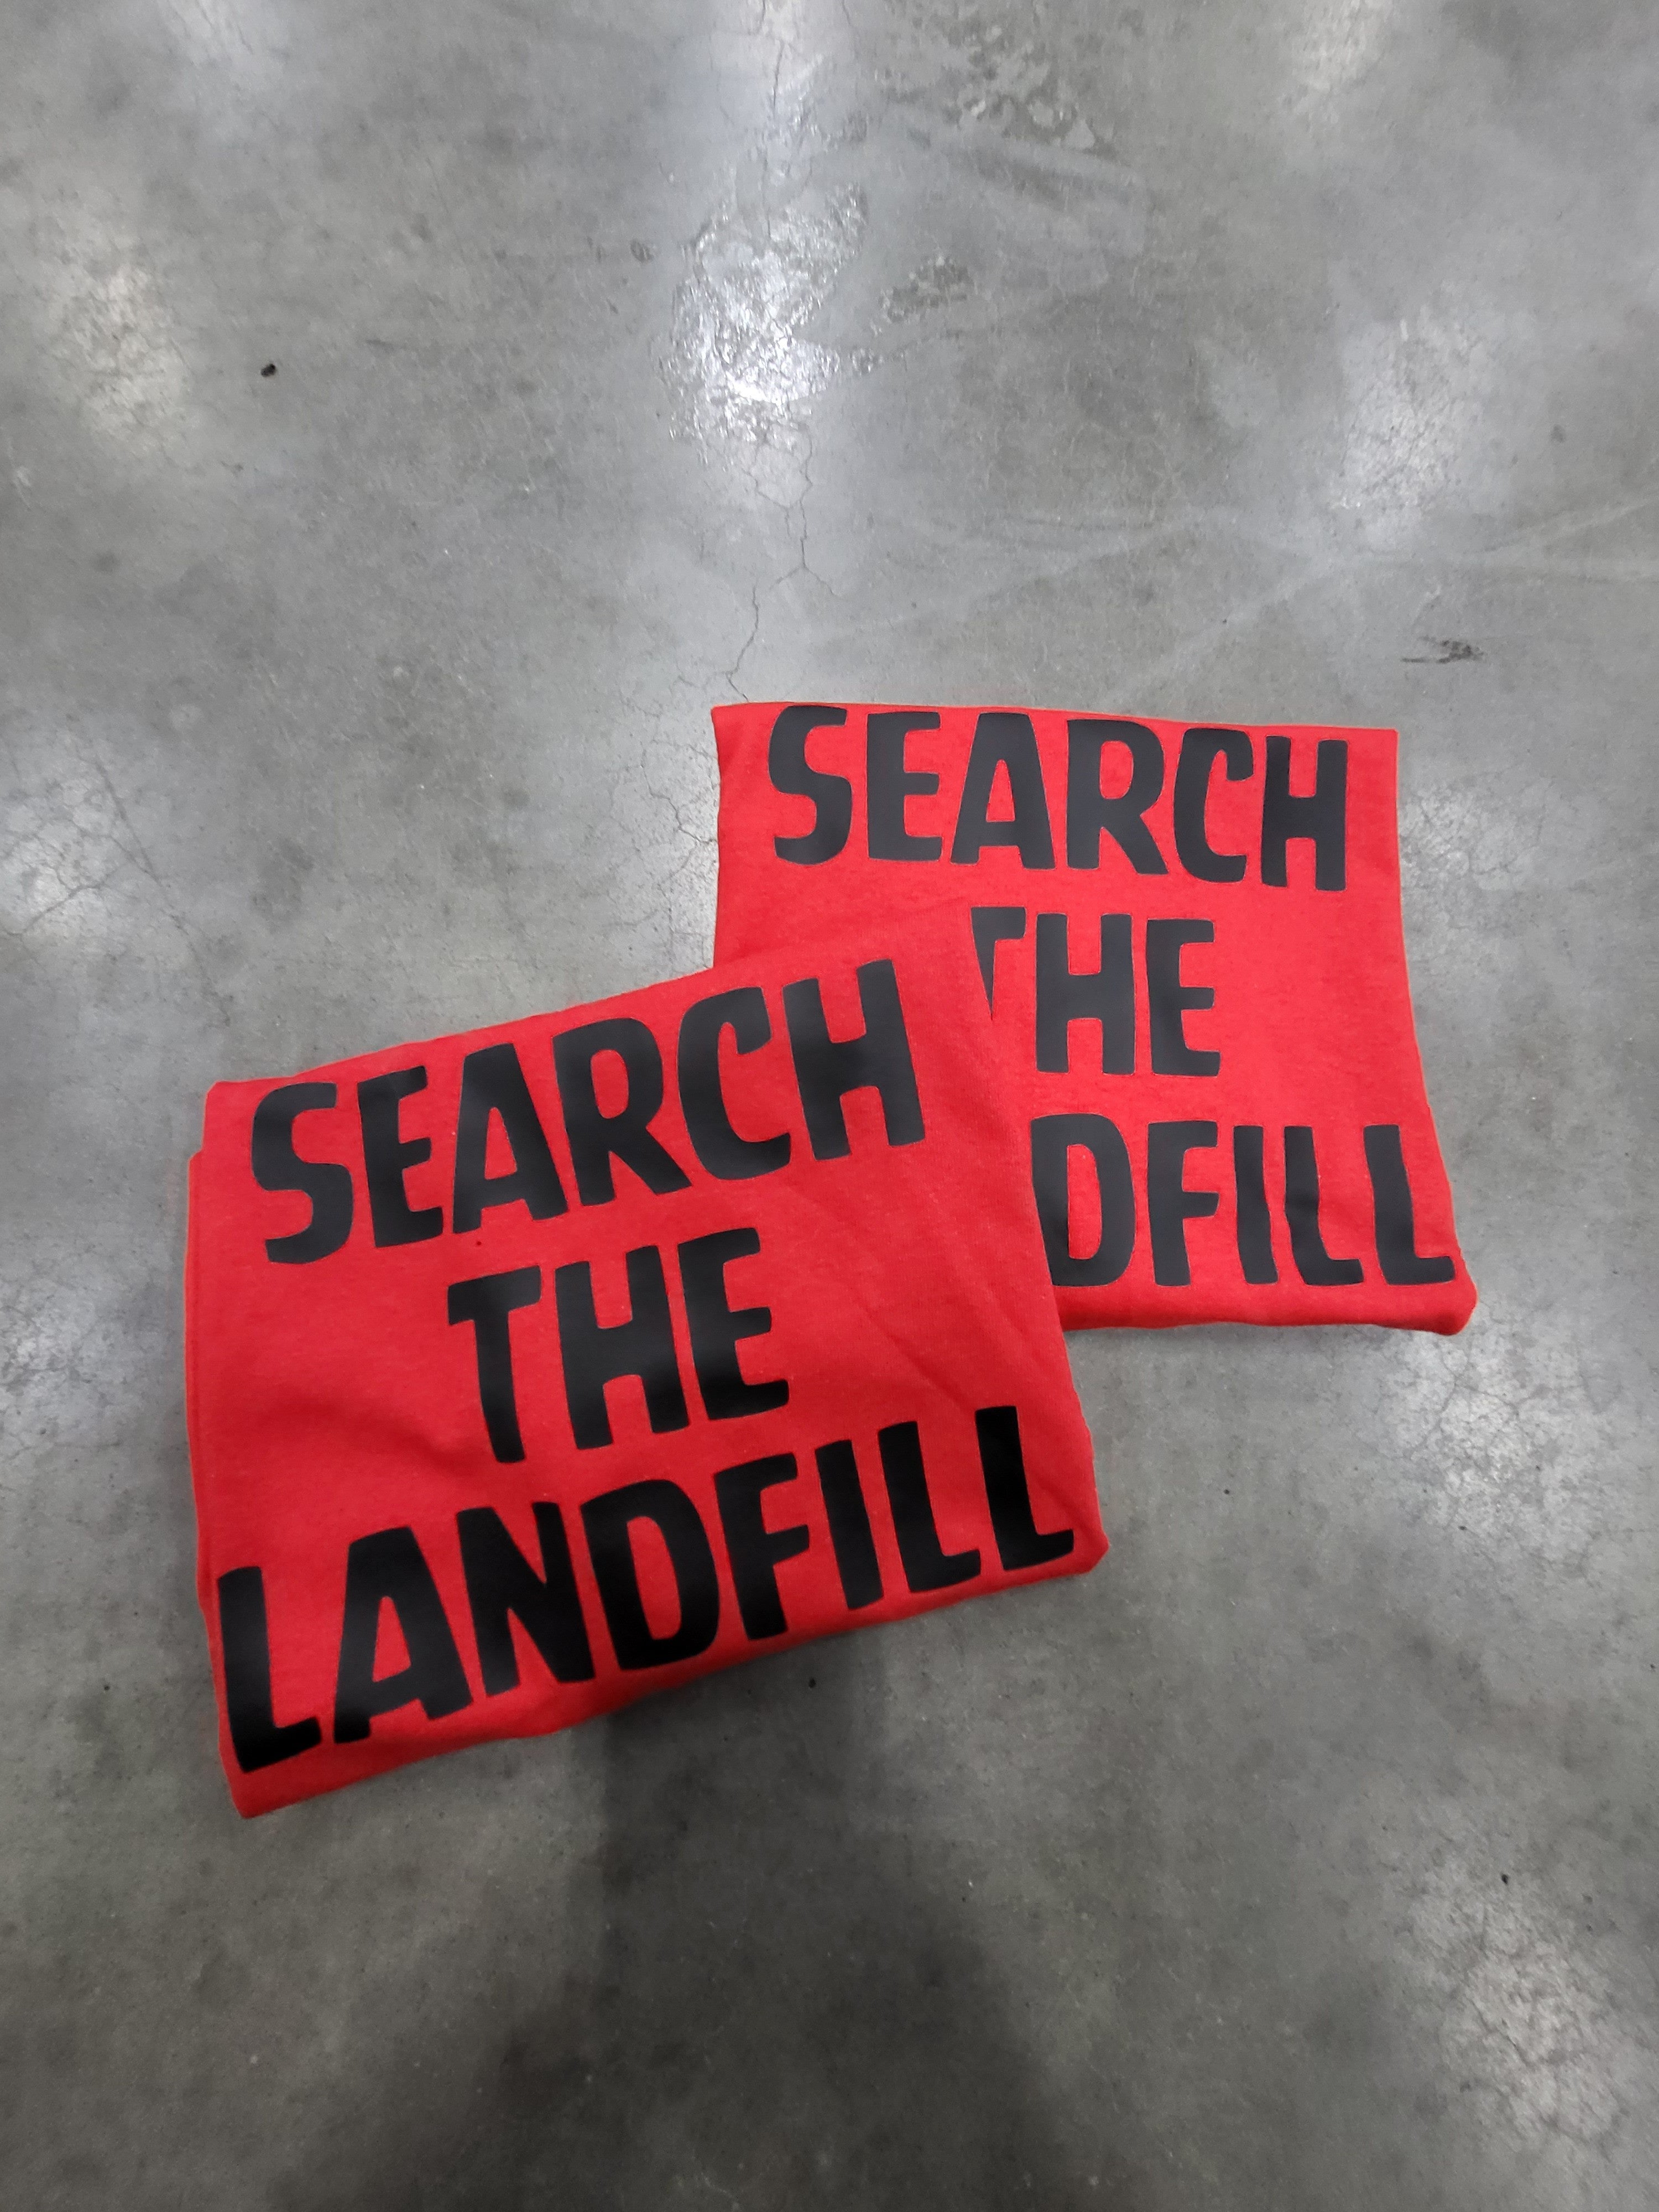 Search the Landfill